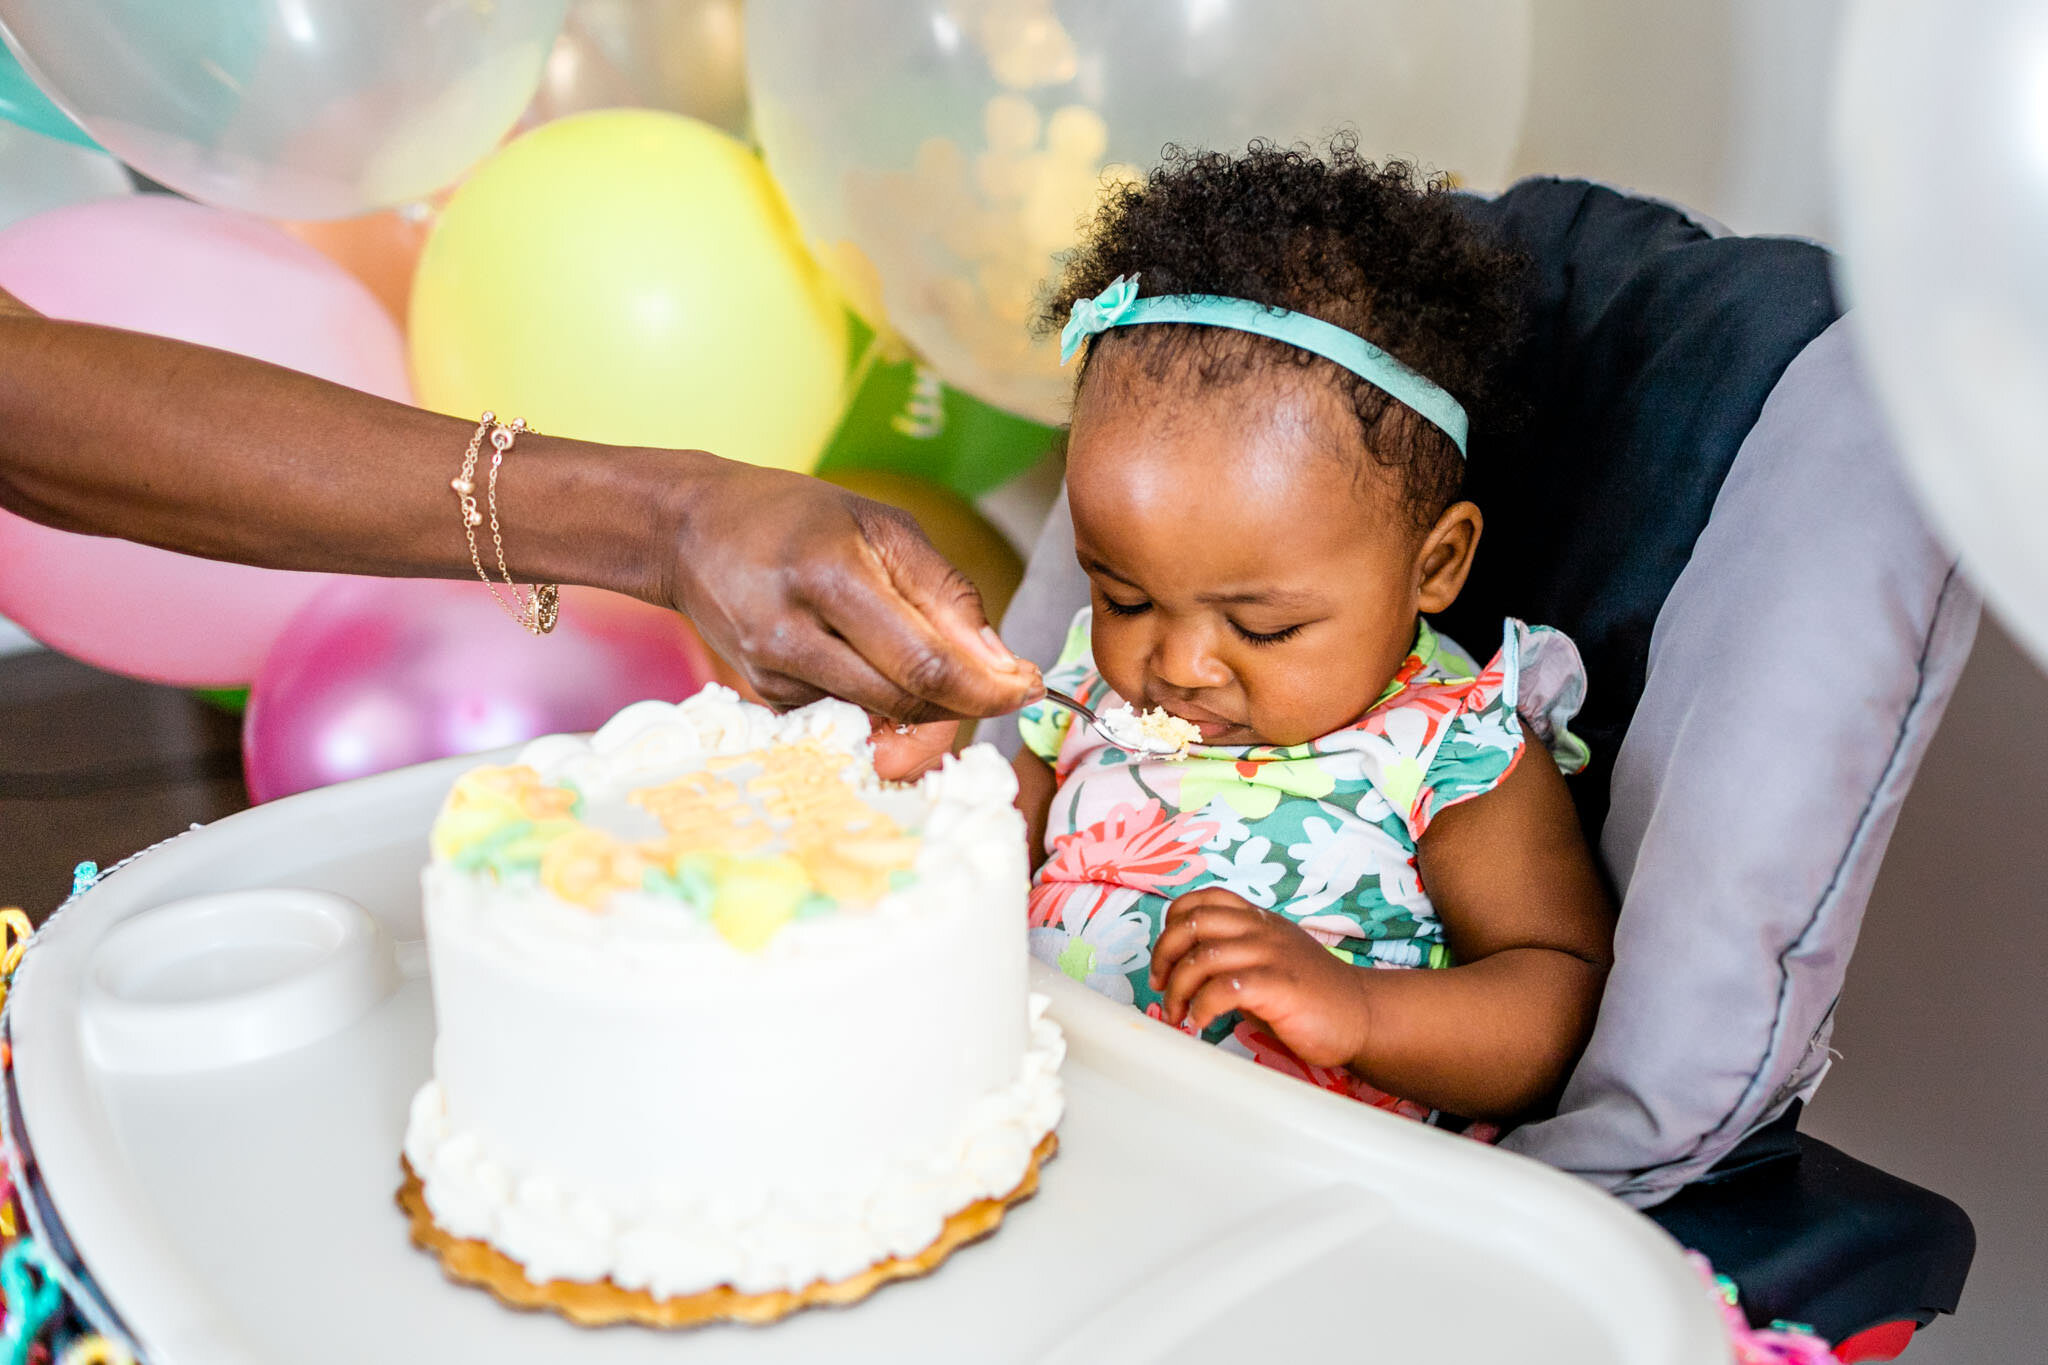 Durham Family Photographer | By G. Lin Photography | Mother spoon feeding cake to baby